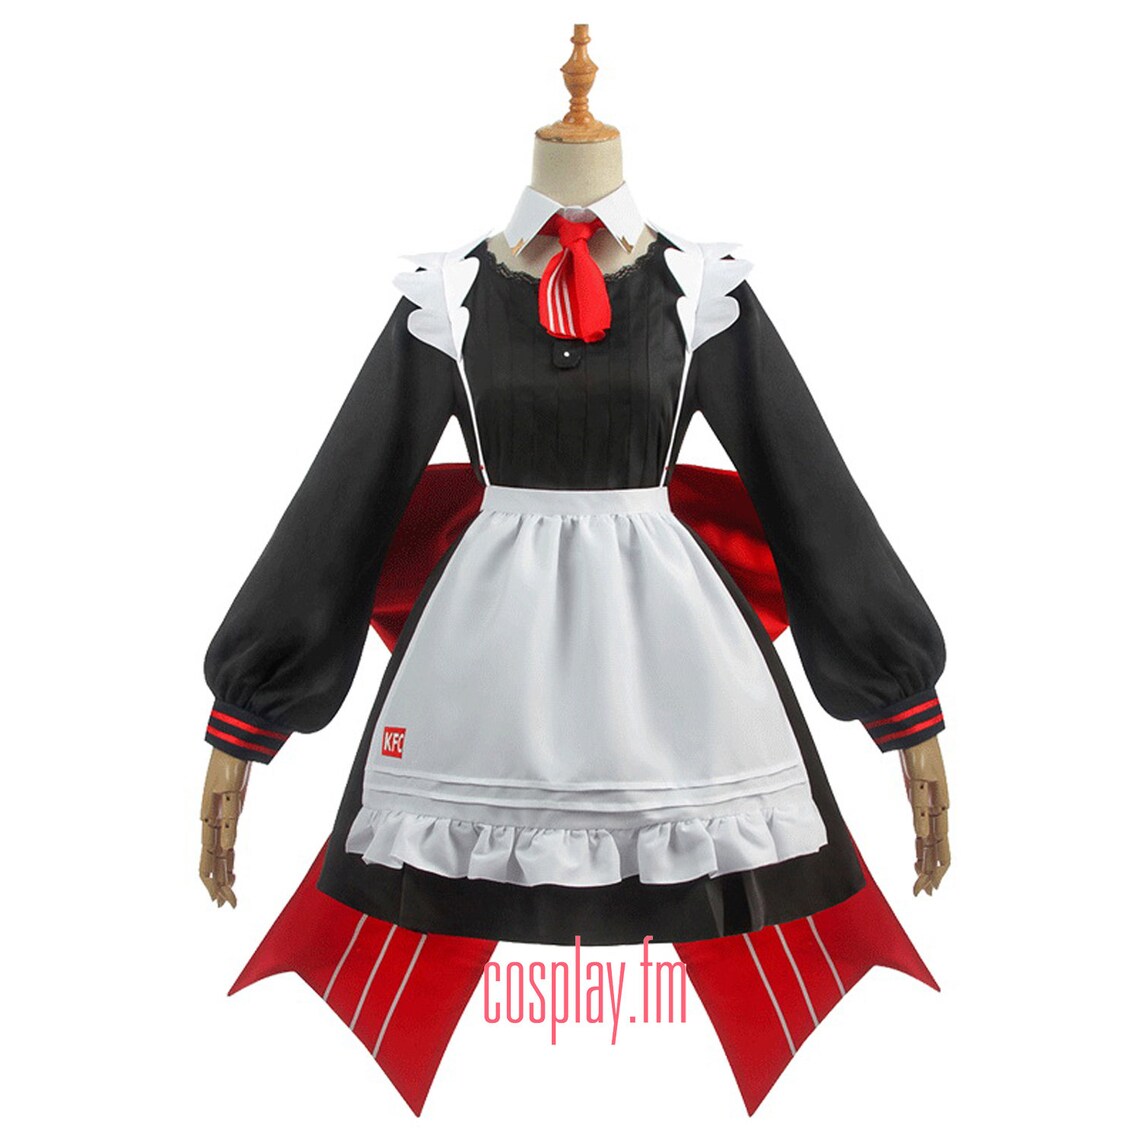 Genshin Impact Noelle Cosplay Costume Maid outfit | Etsy